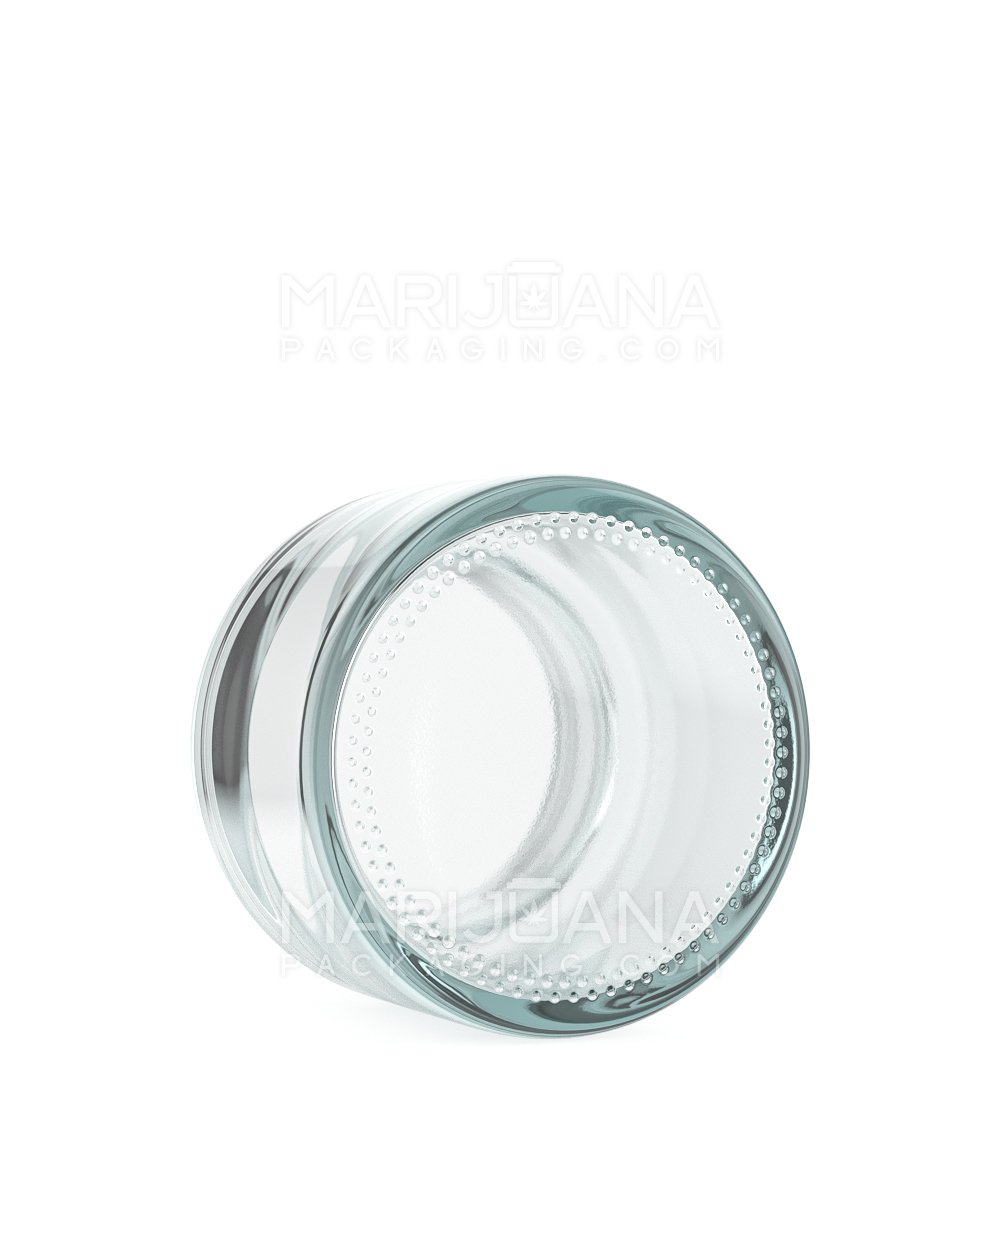 Straight Sided Clear Glass Jars | 53mm - 2.5oz - 84 Count - 5